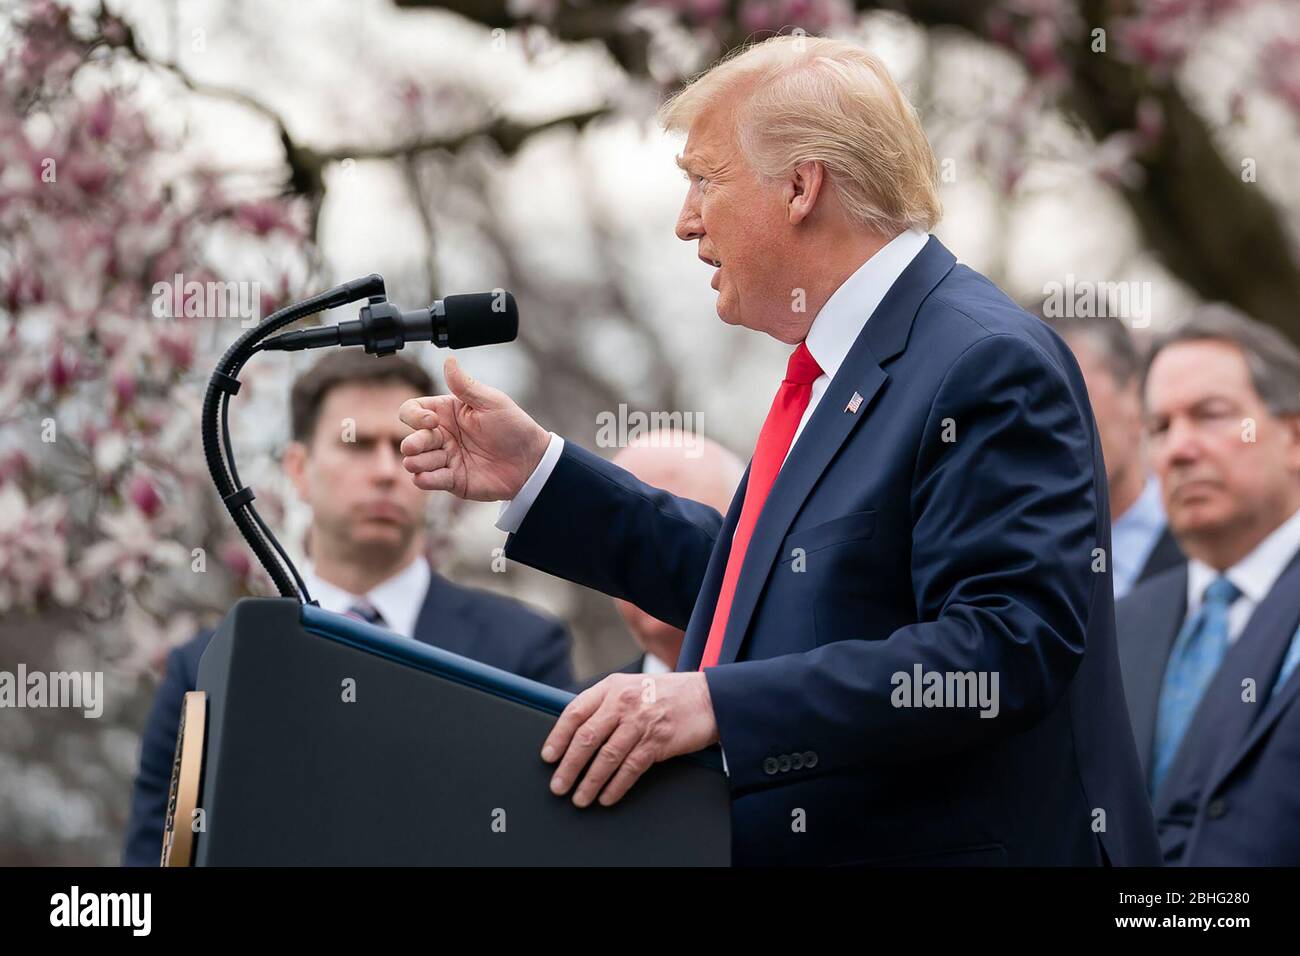 President Donald J. Trump, joined by members of the White House Coronavirus Task Force, announces a national emergency to further battle the Coronavirus outbreak, at a news conference Friday, March 13, 2020, in the Rose Garden of the White House. (USA) Stock Photo